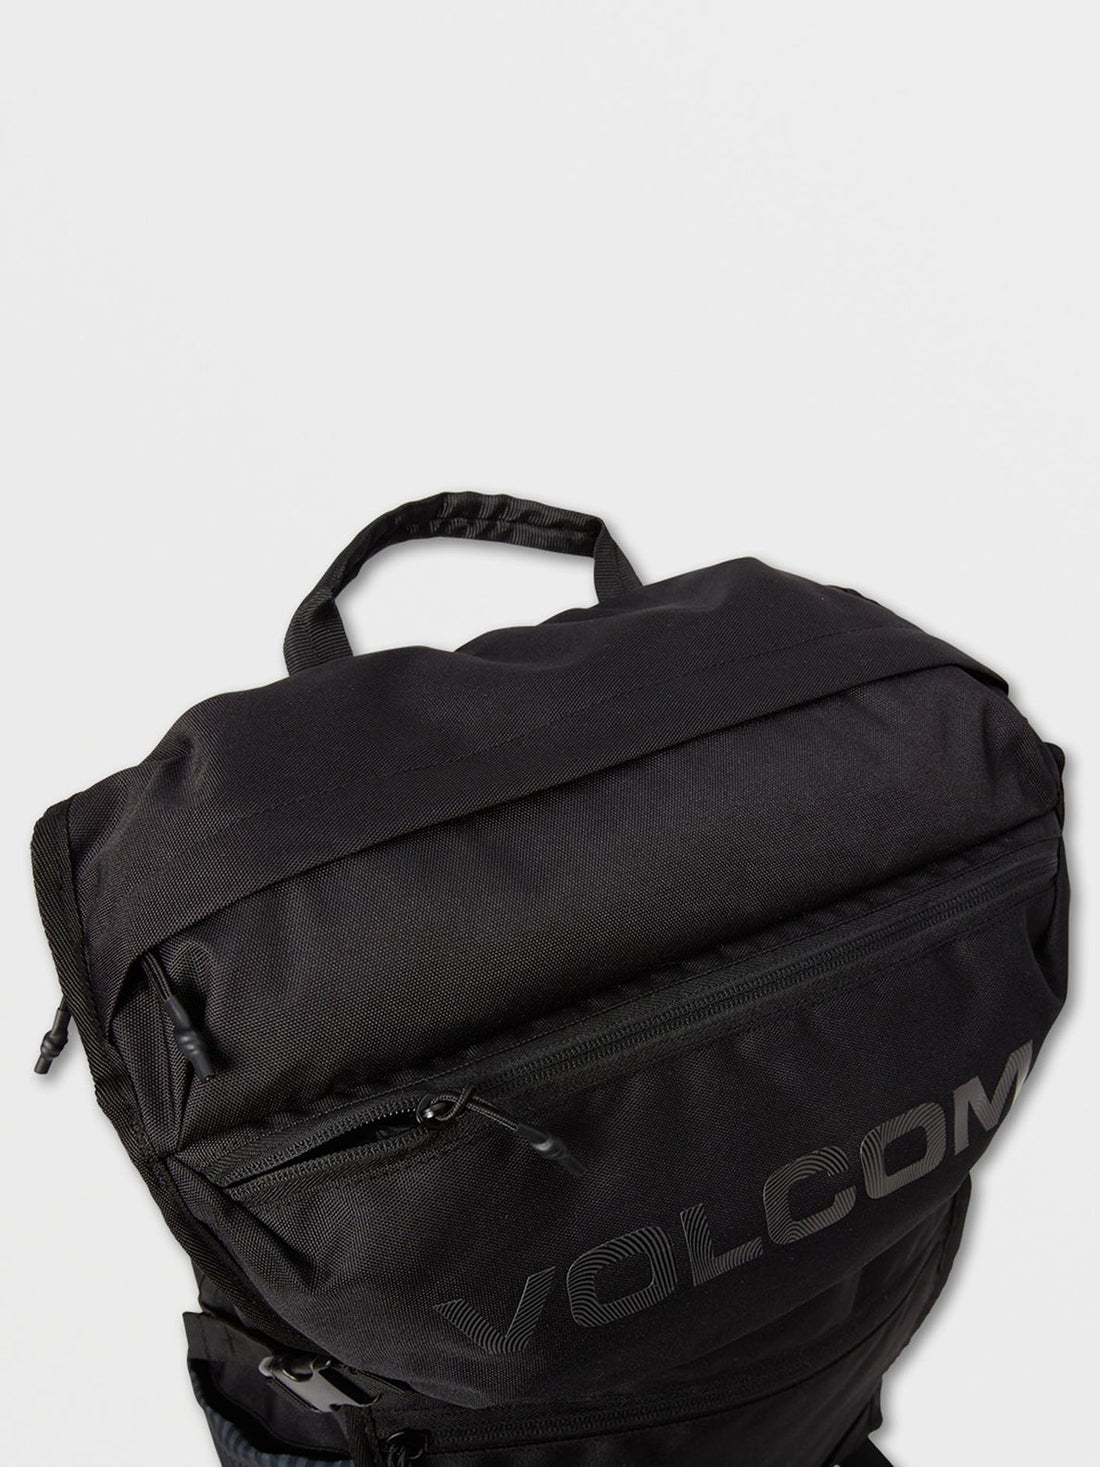 VOLCOM SUBSTRATE BACKPACK - BLACK